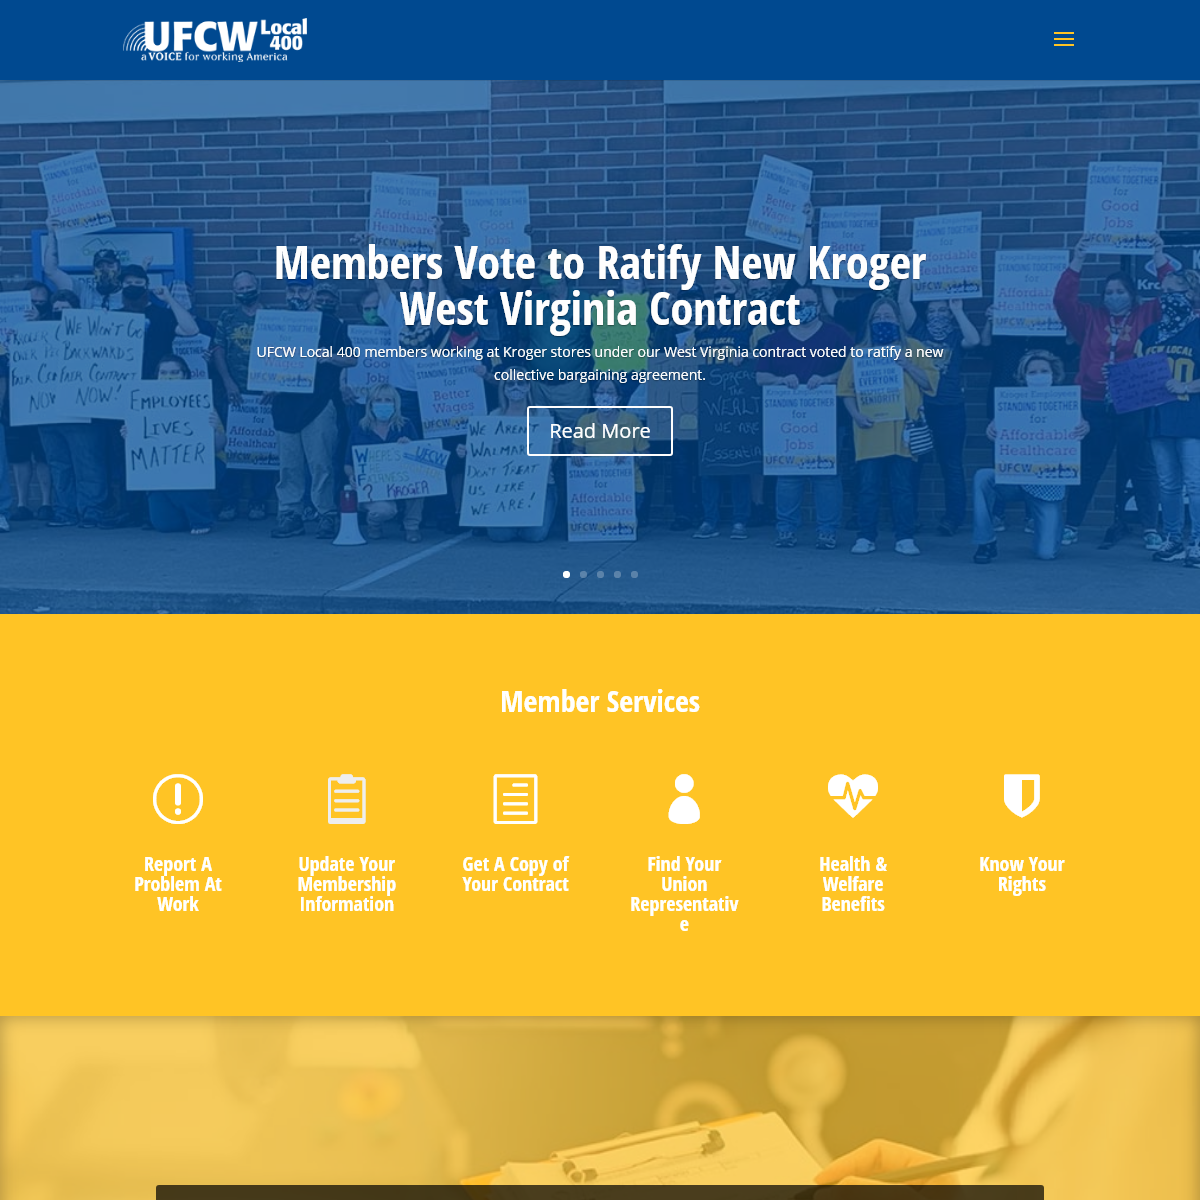 A complete backup of ufcw400.org